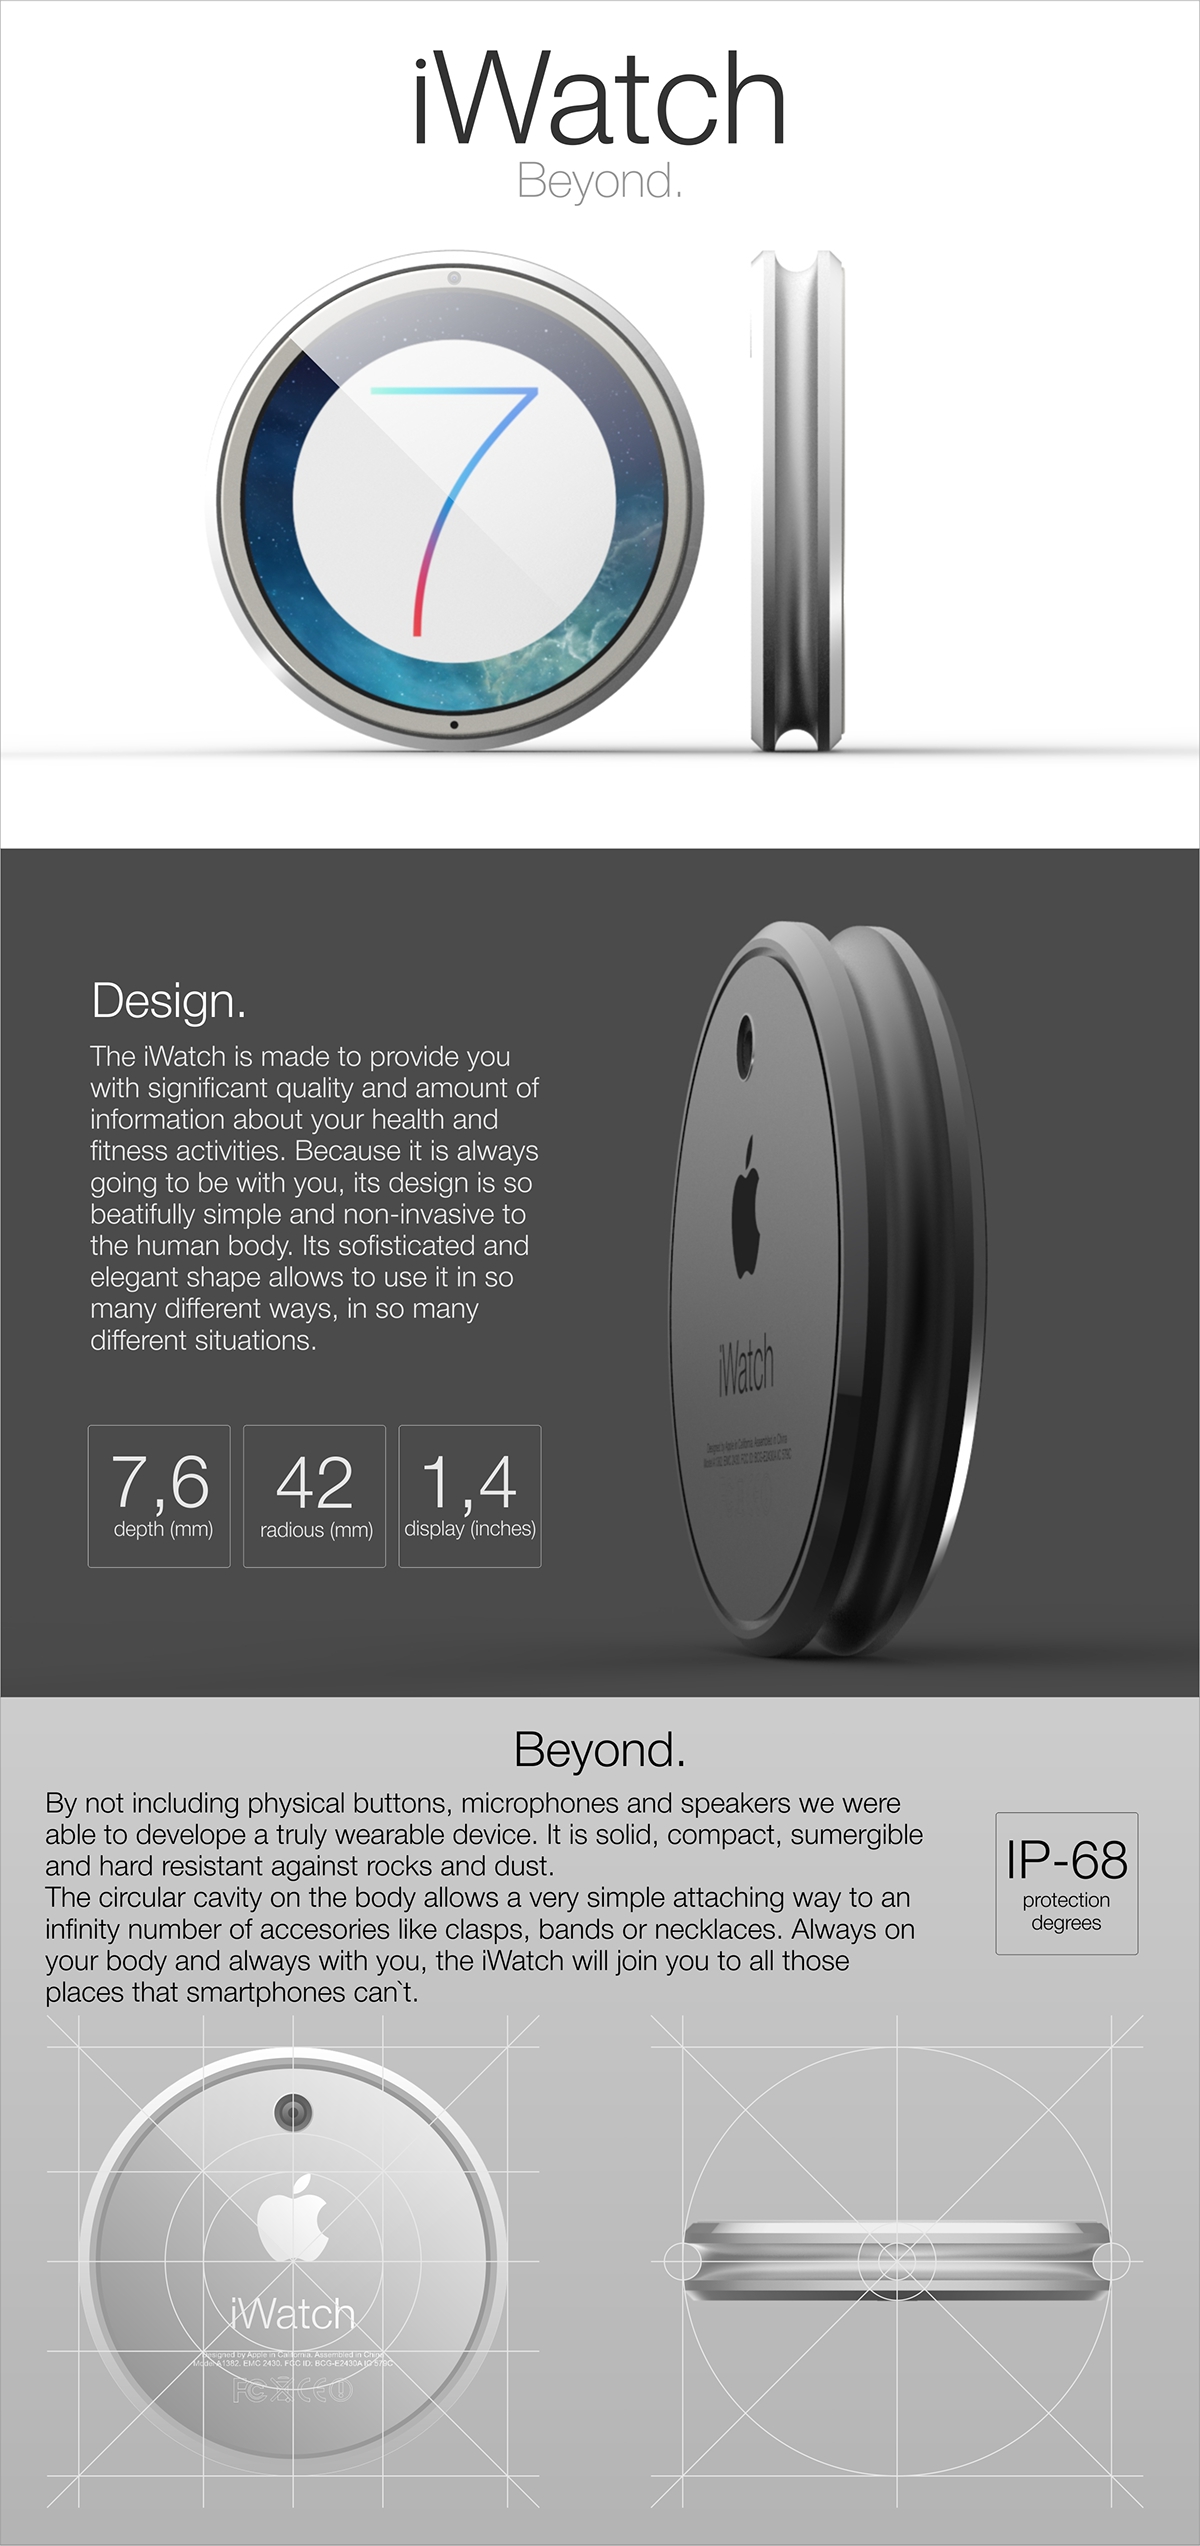 apple iwatch smartwatch Wearable concept devices